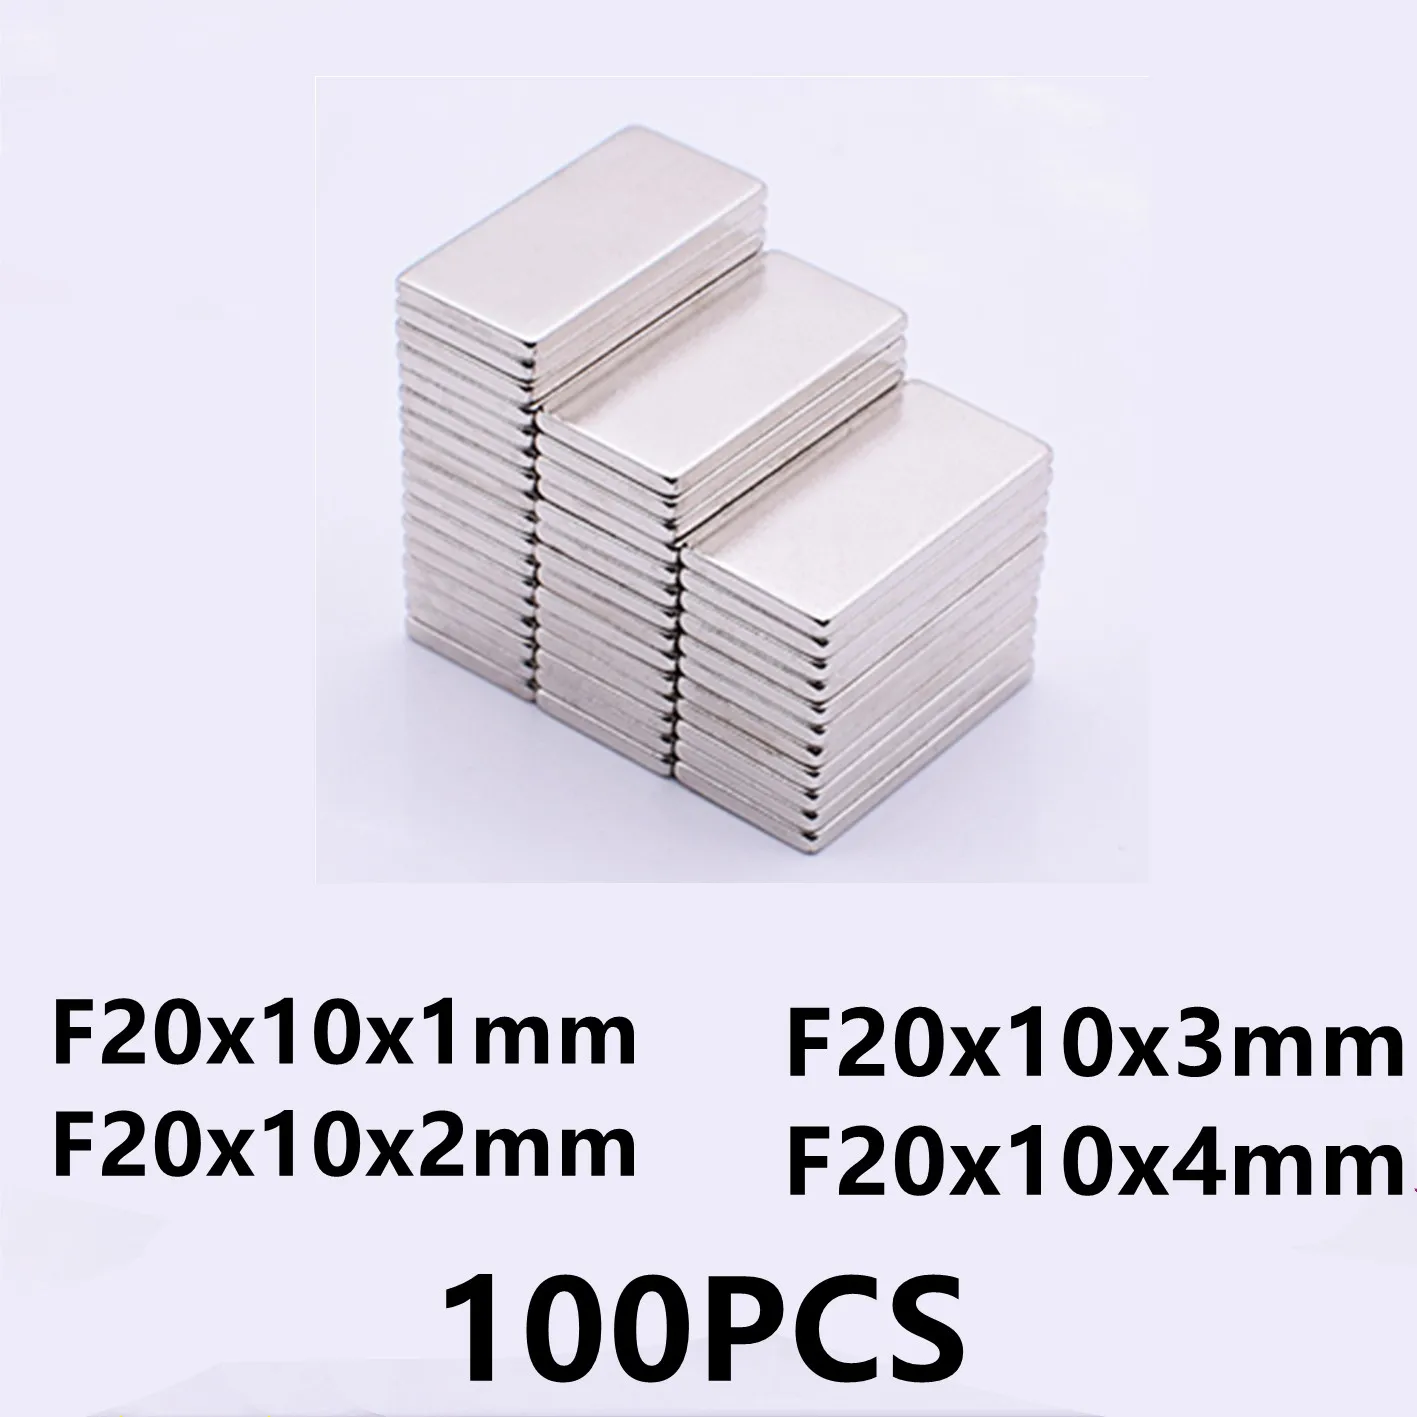 

100PCS/LOT Magnet 20*10*1 20*10*2 20*10*3 20*10*4 N35 NdFeB MAGNET 20x10x1 20x10x2 20x10x3 20x10x4 Neodymium Magnets